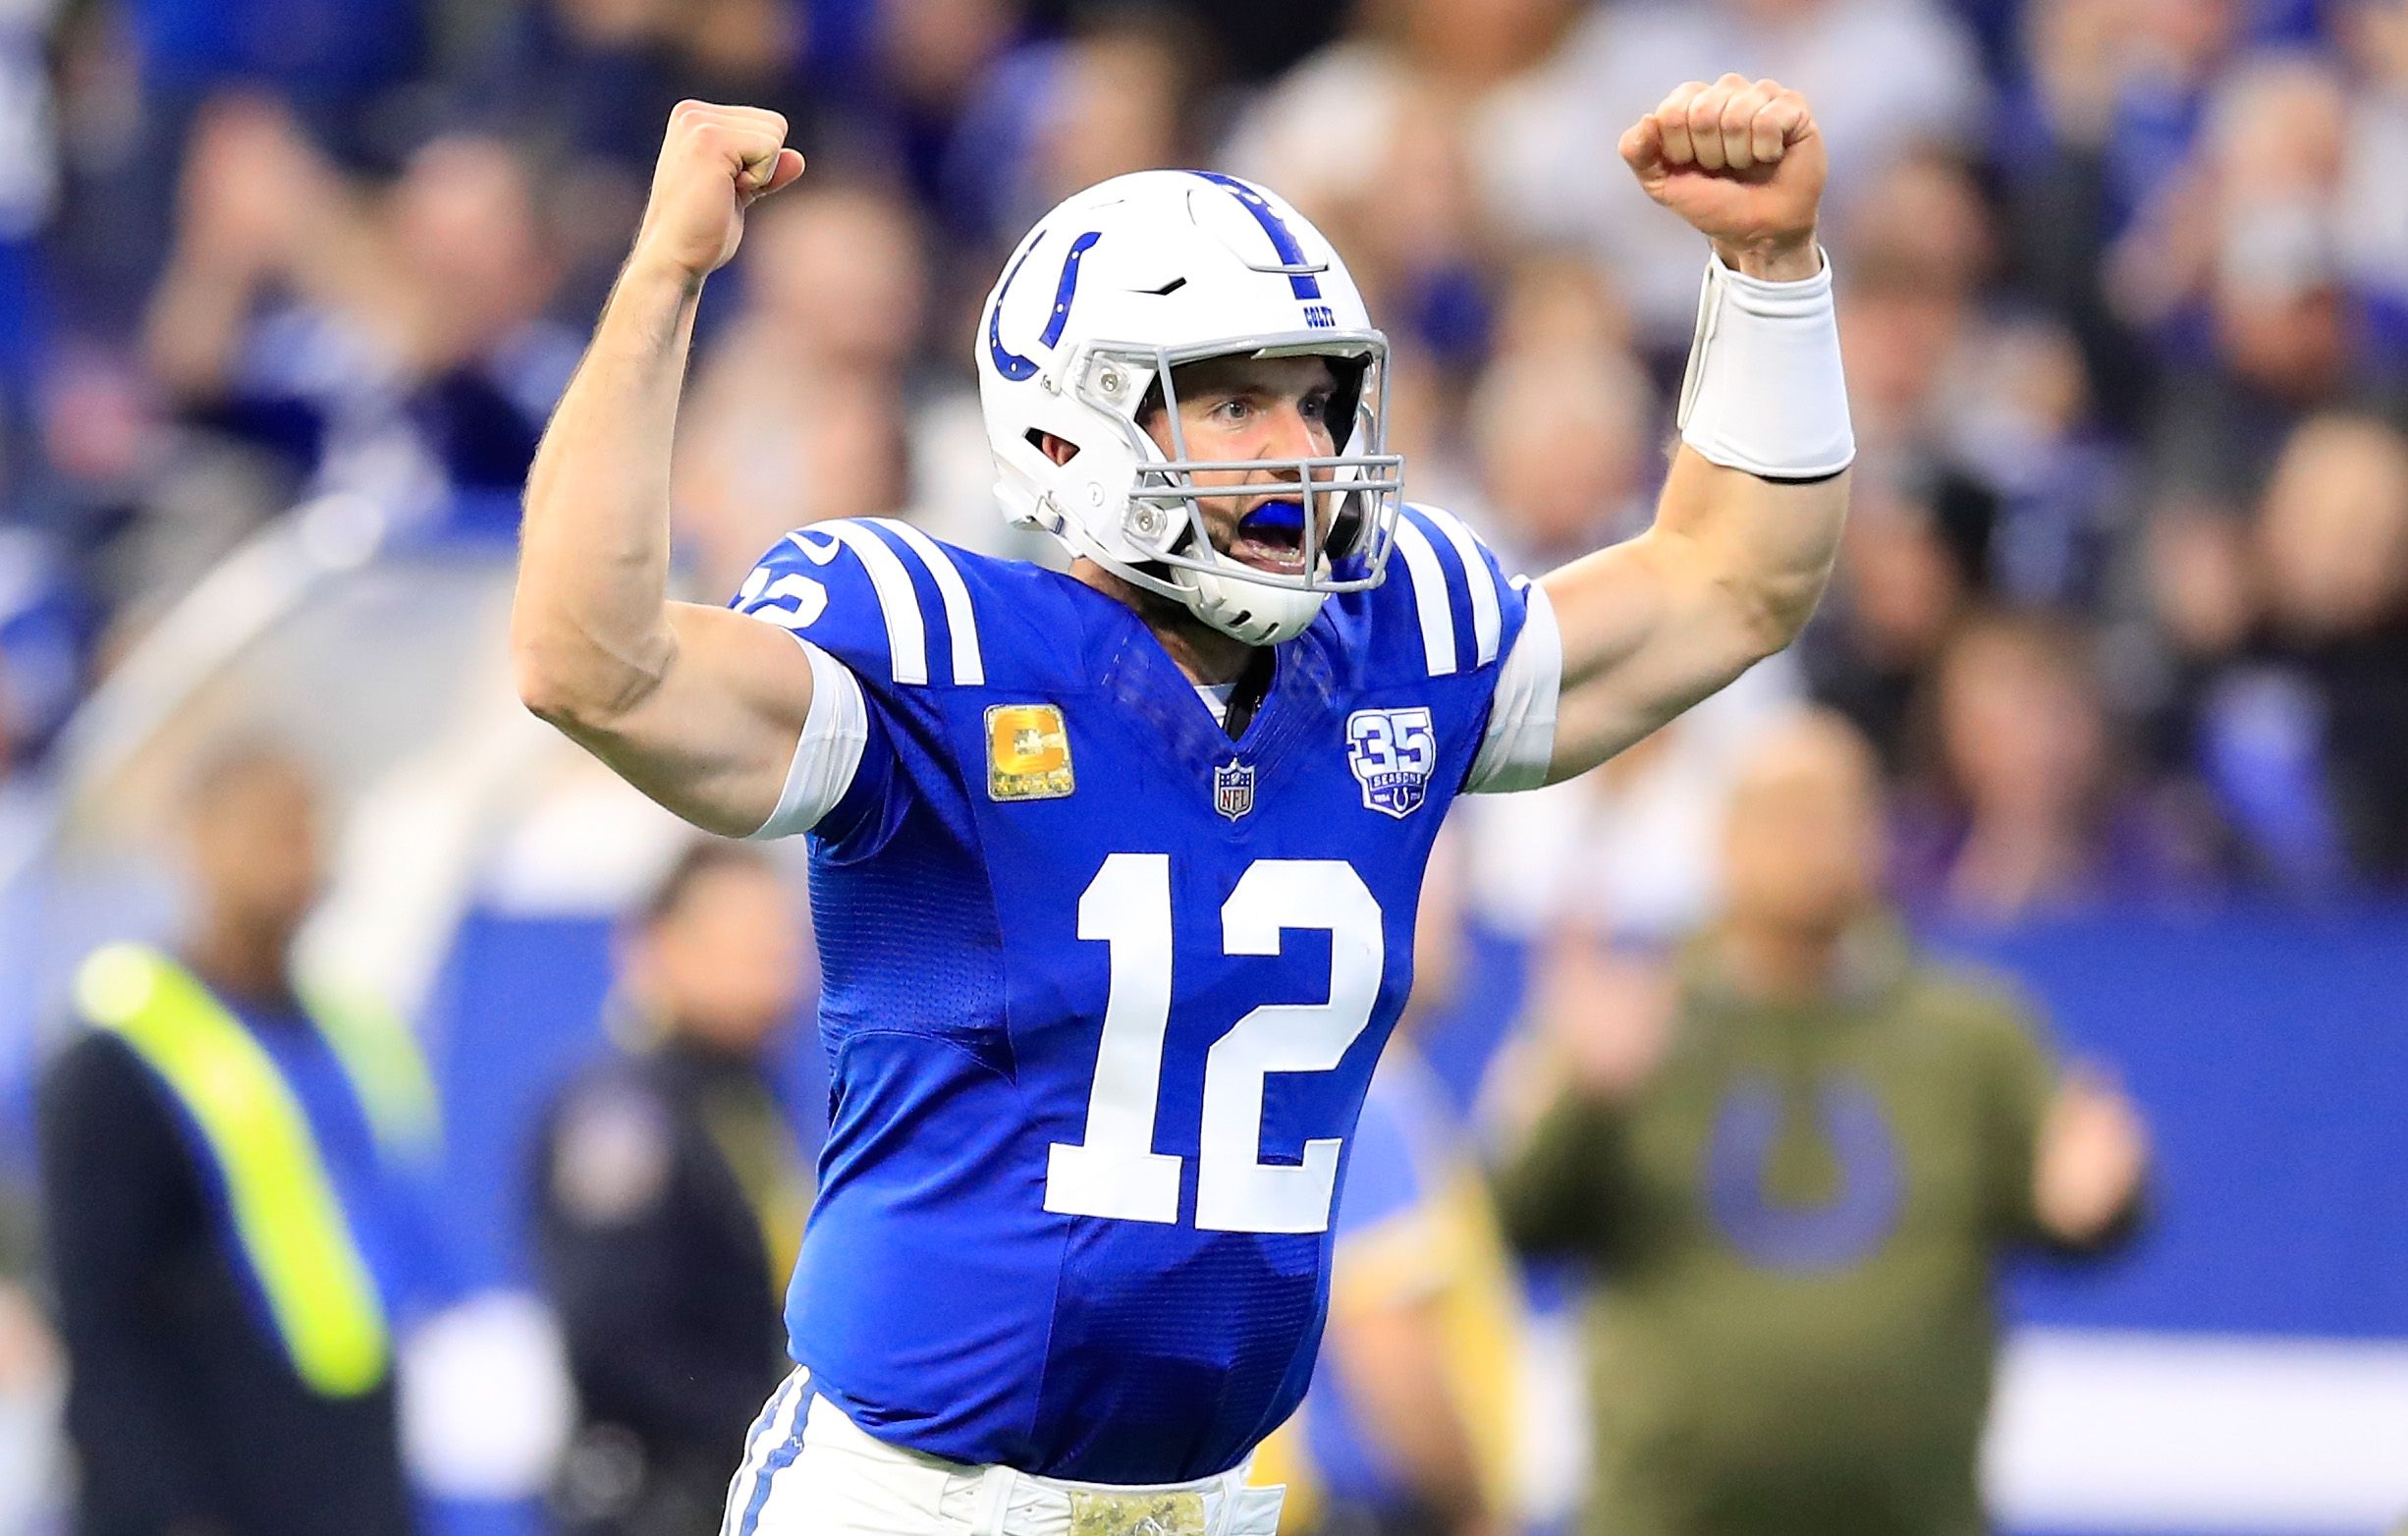 GettyImages-1071856278 Andrew Luck